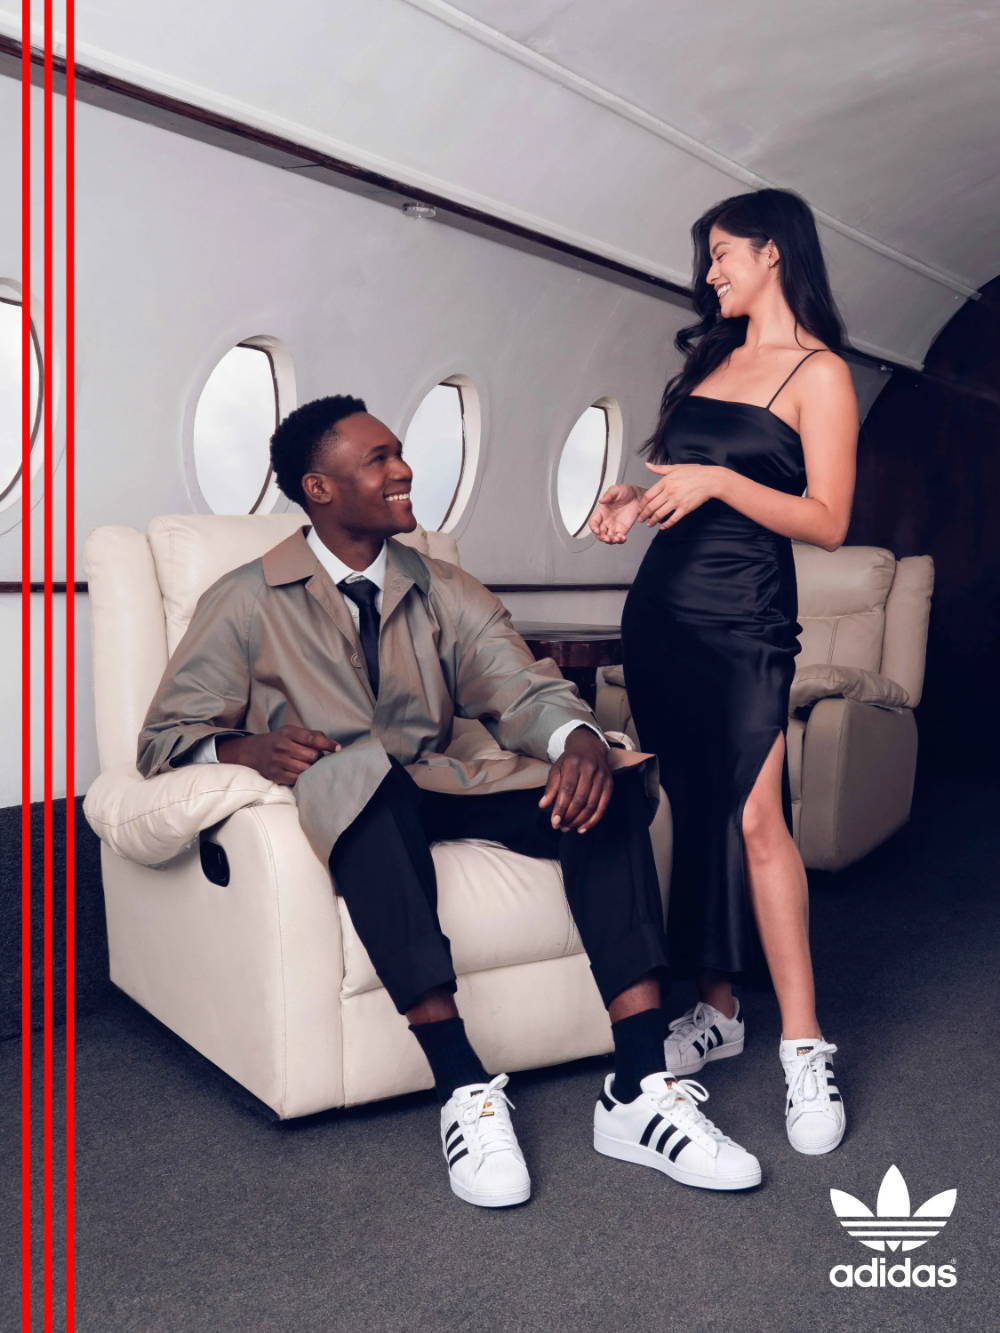 2 models on a private jet